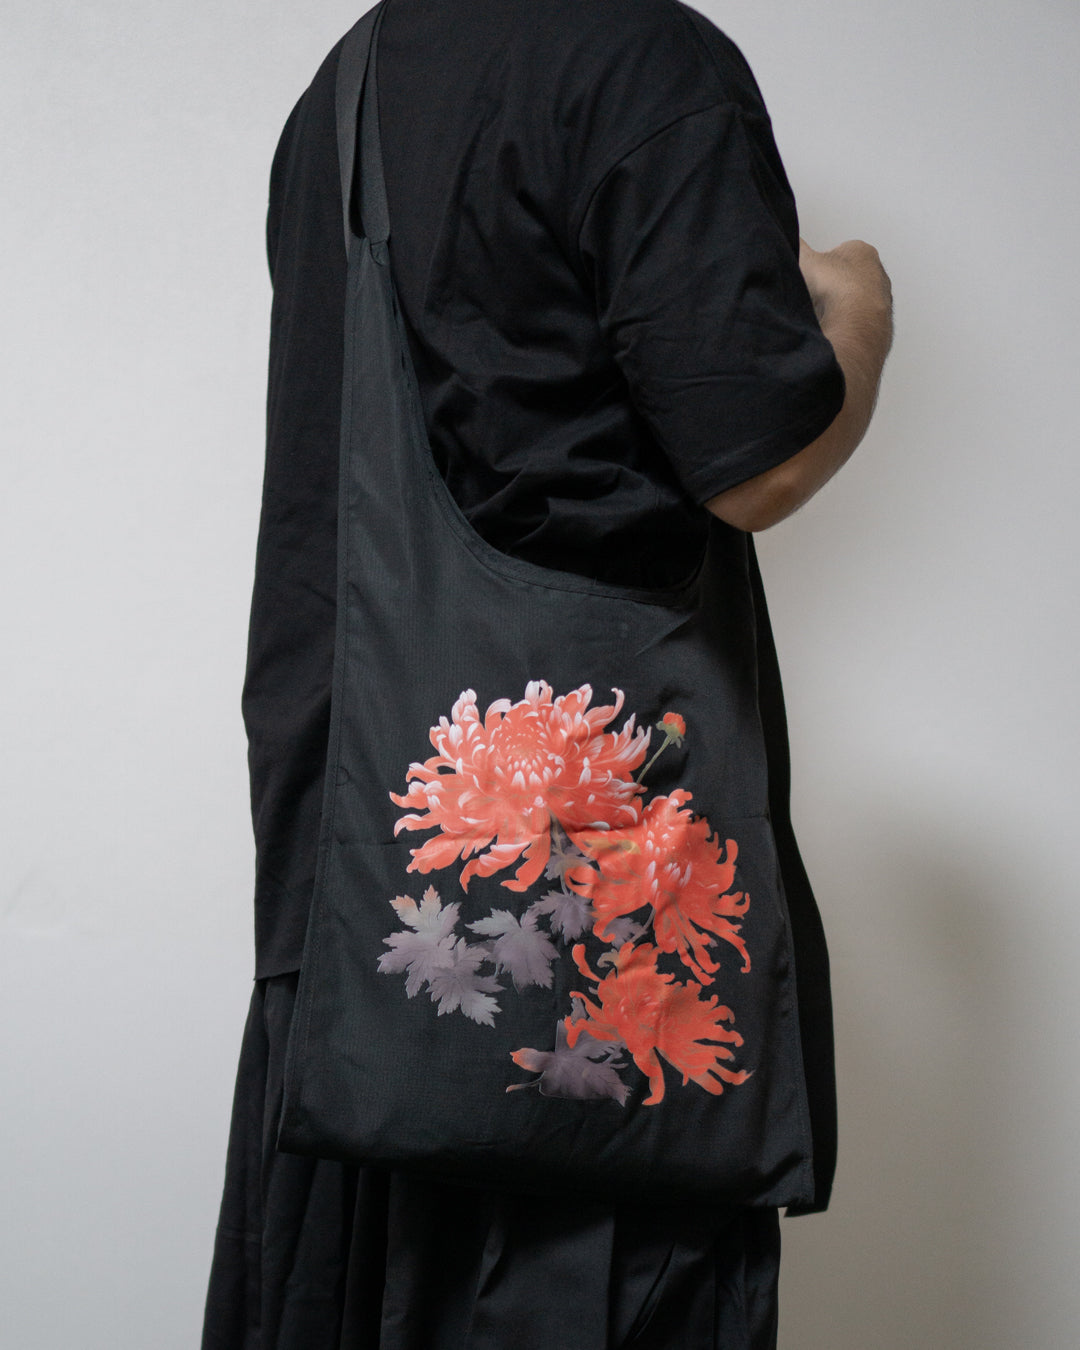 ♠♥RED CHRYSANTHEMUM TWO WAY MARCHE BAG